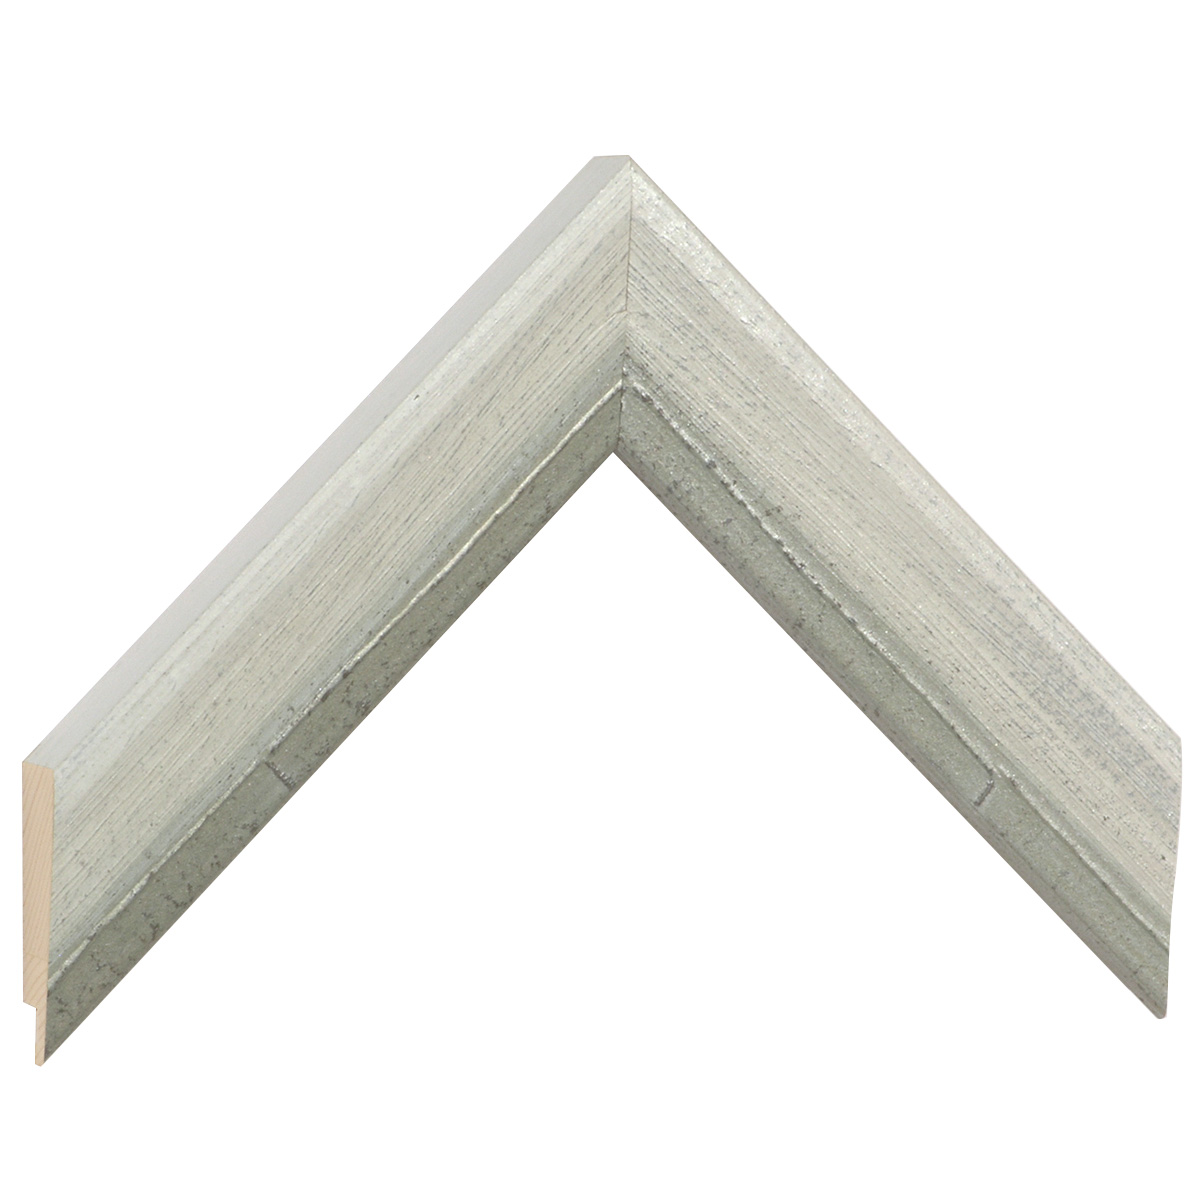 Moulding finger-jointed fir 37mm - distressed white finish, silver edg - Sample